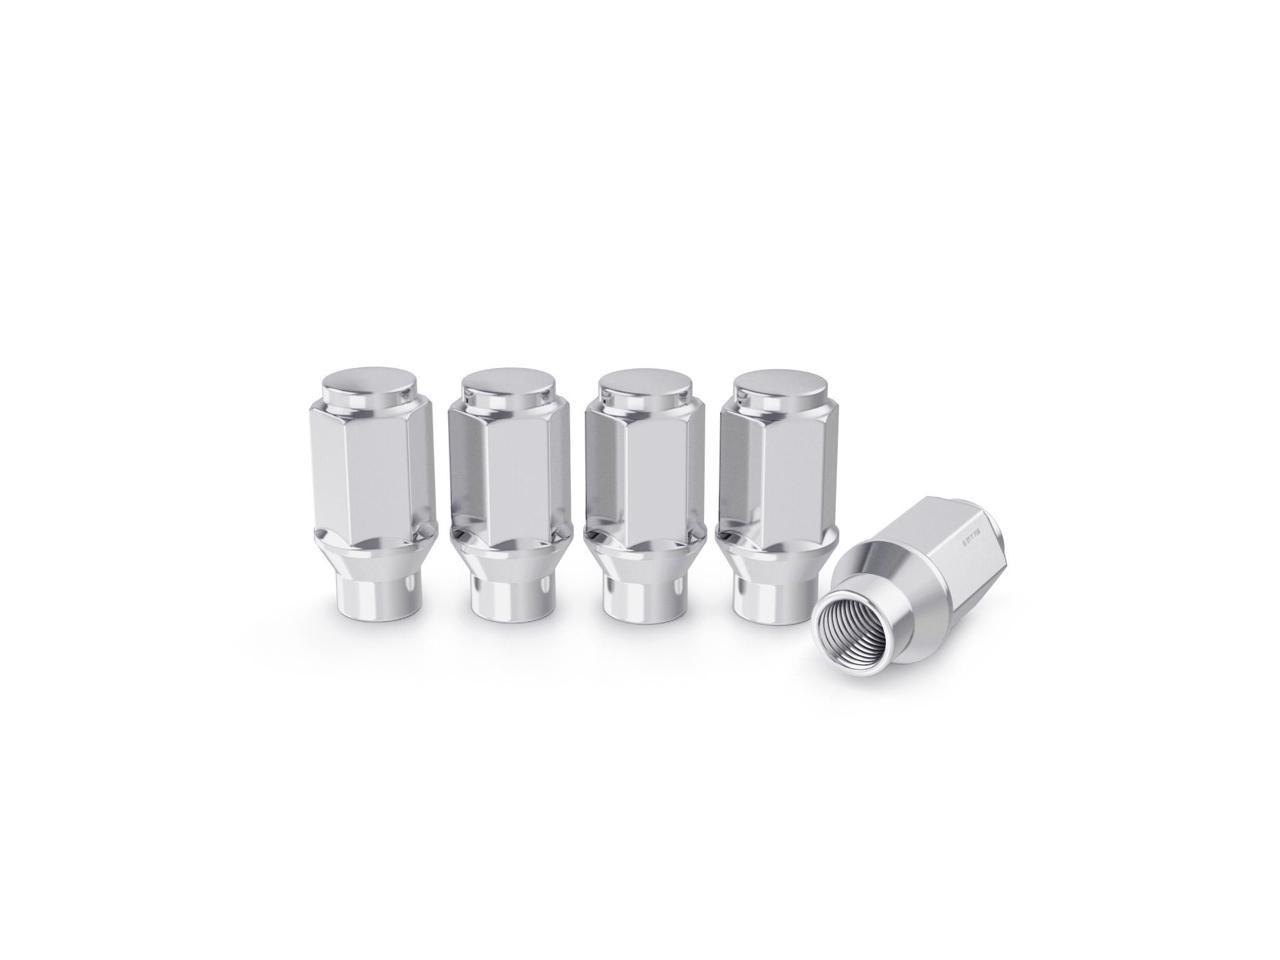 24pcs Chrome Silver Bulge Lug Nuts Closed End ET Style 1/2x20 Threads Compatible with 6Lug Vehicles Wheels Cone Conical Taper Seat Shank 1.75 inch Length